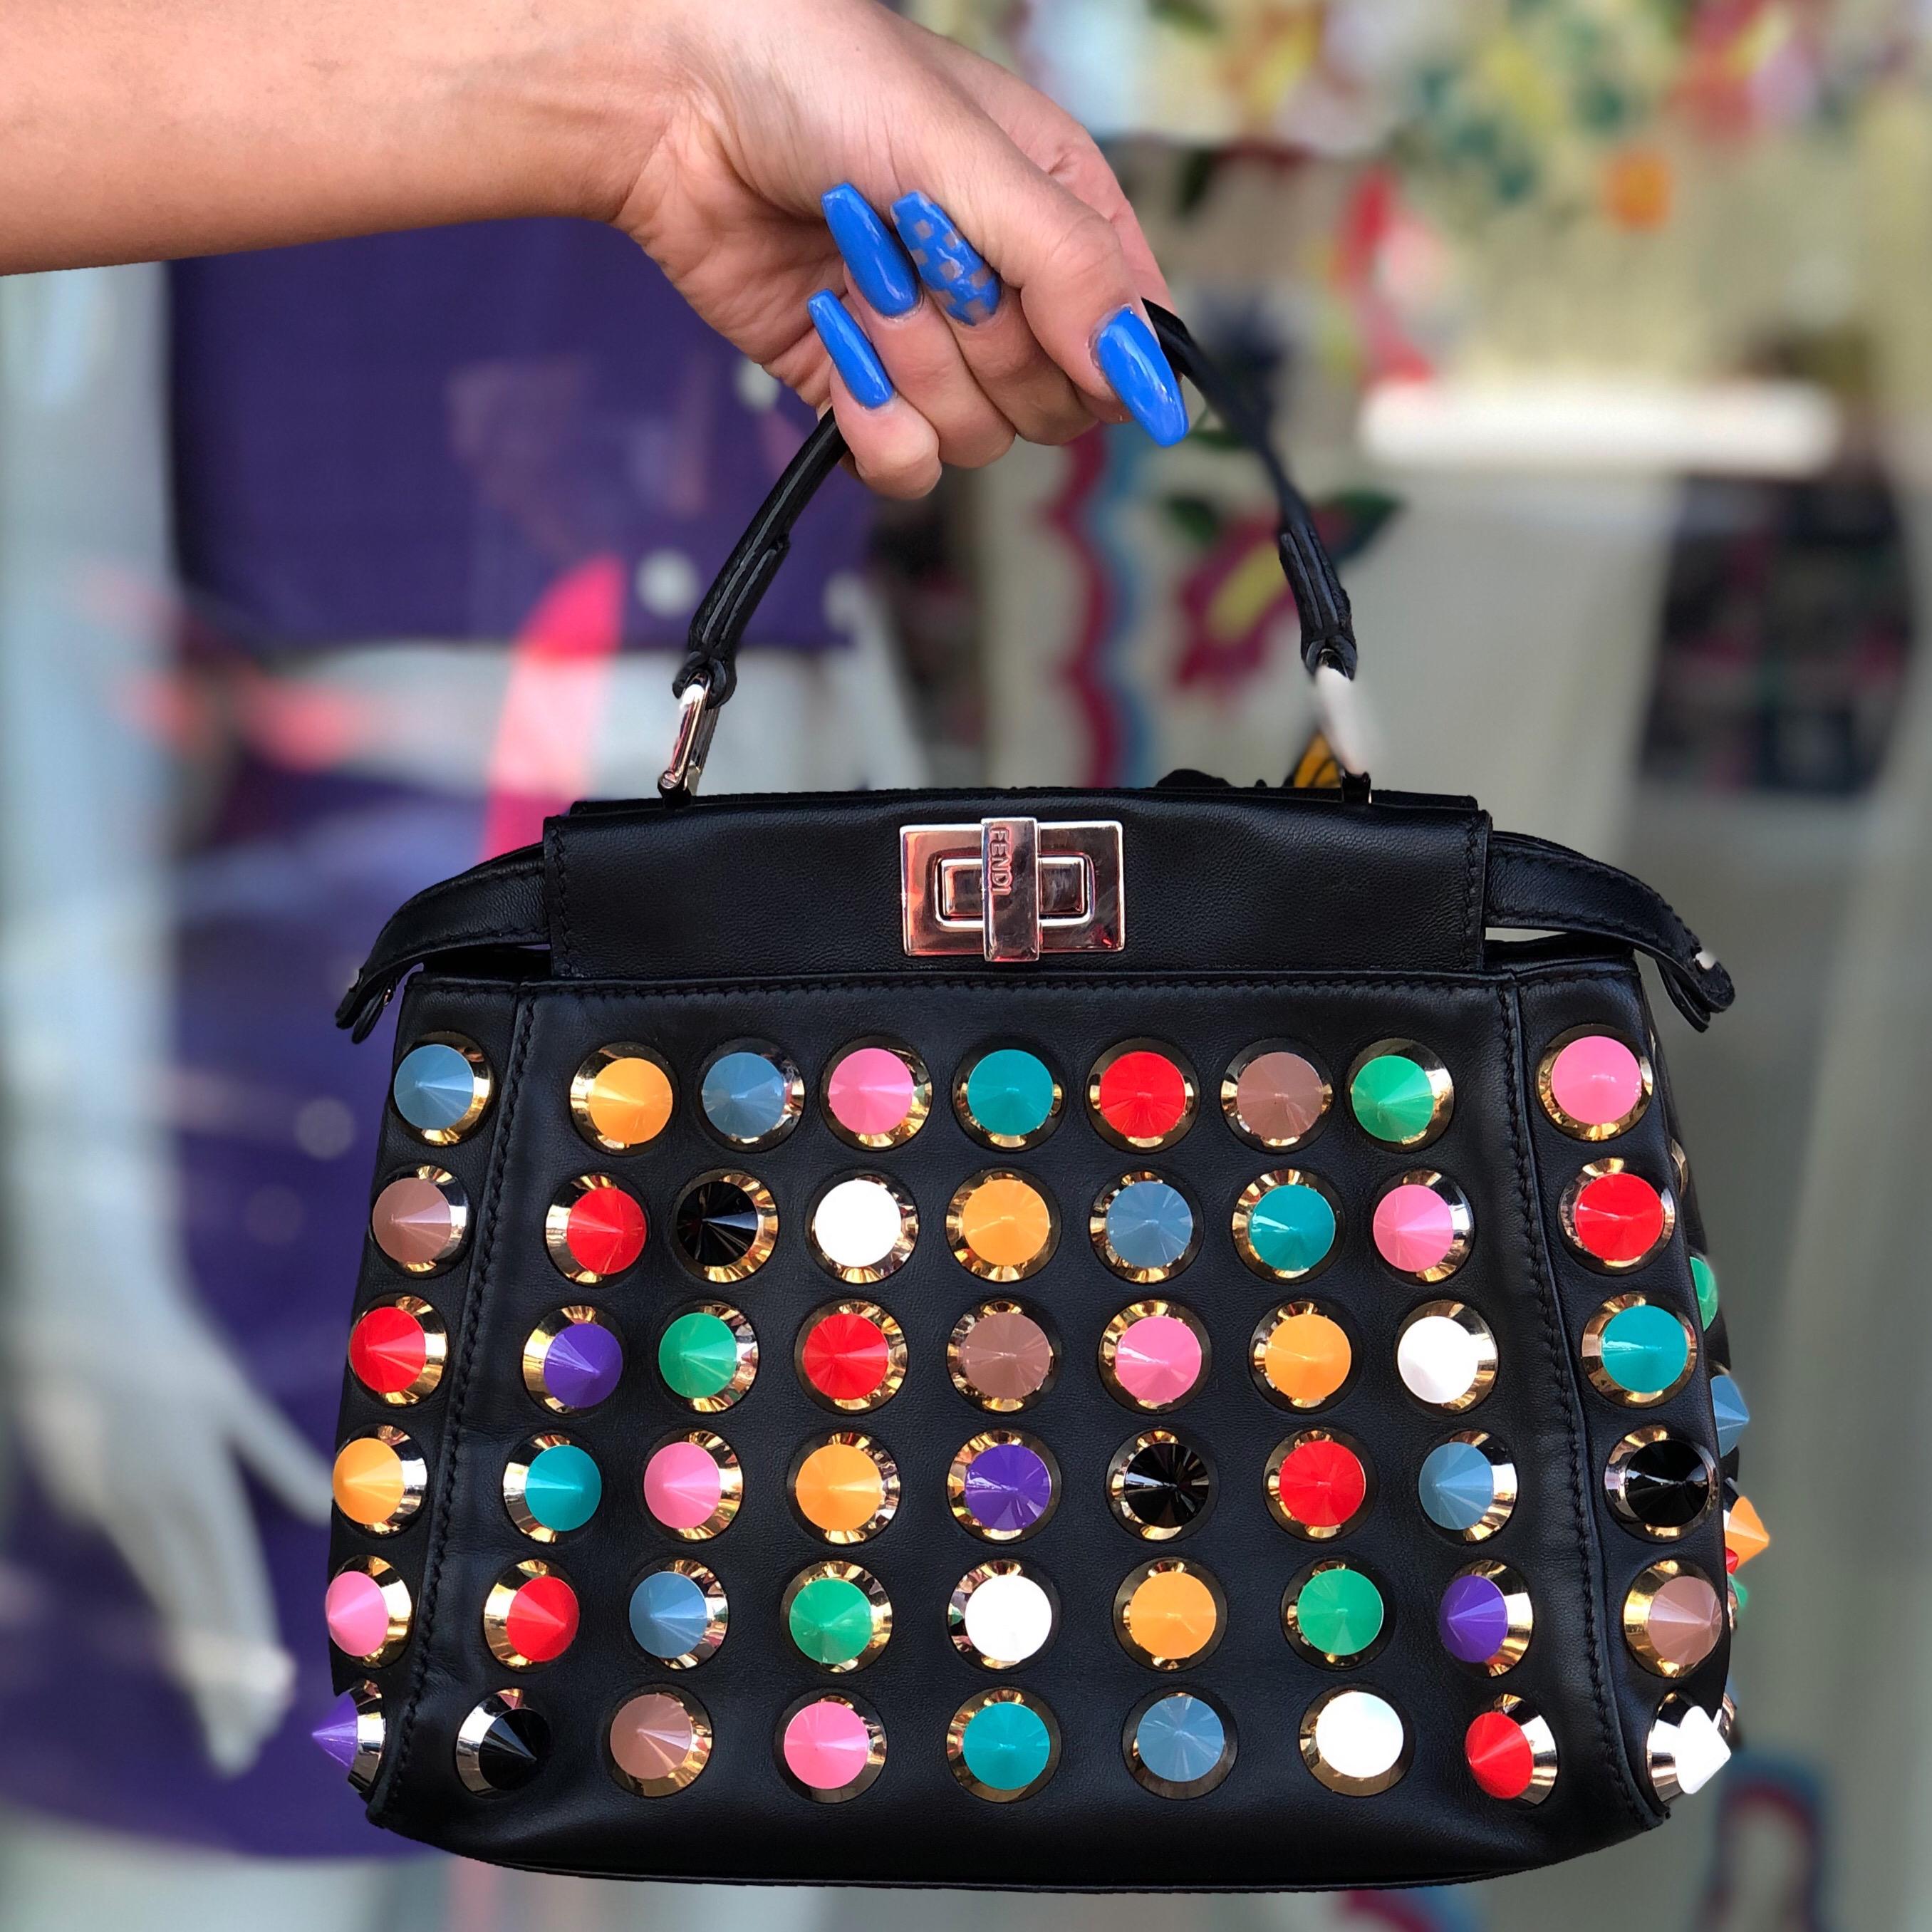 Add some color to your look with this amazing Fendi! Circa 2015, this coveted peek-a-boo bag is crafted from black leather and features a colorful studded exterior, silver turn lock closure, single flap top handle and a detachable shoulder strap.